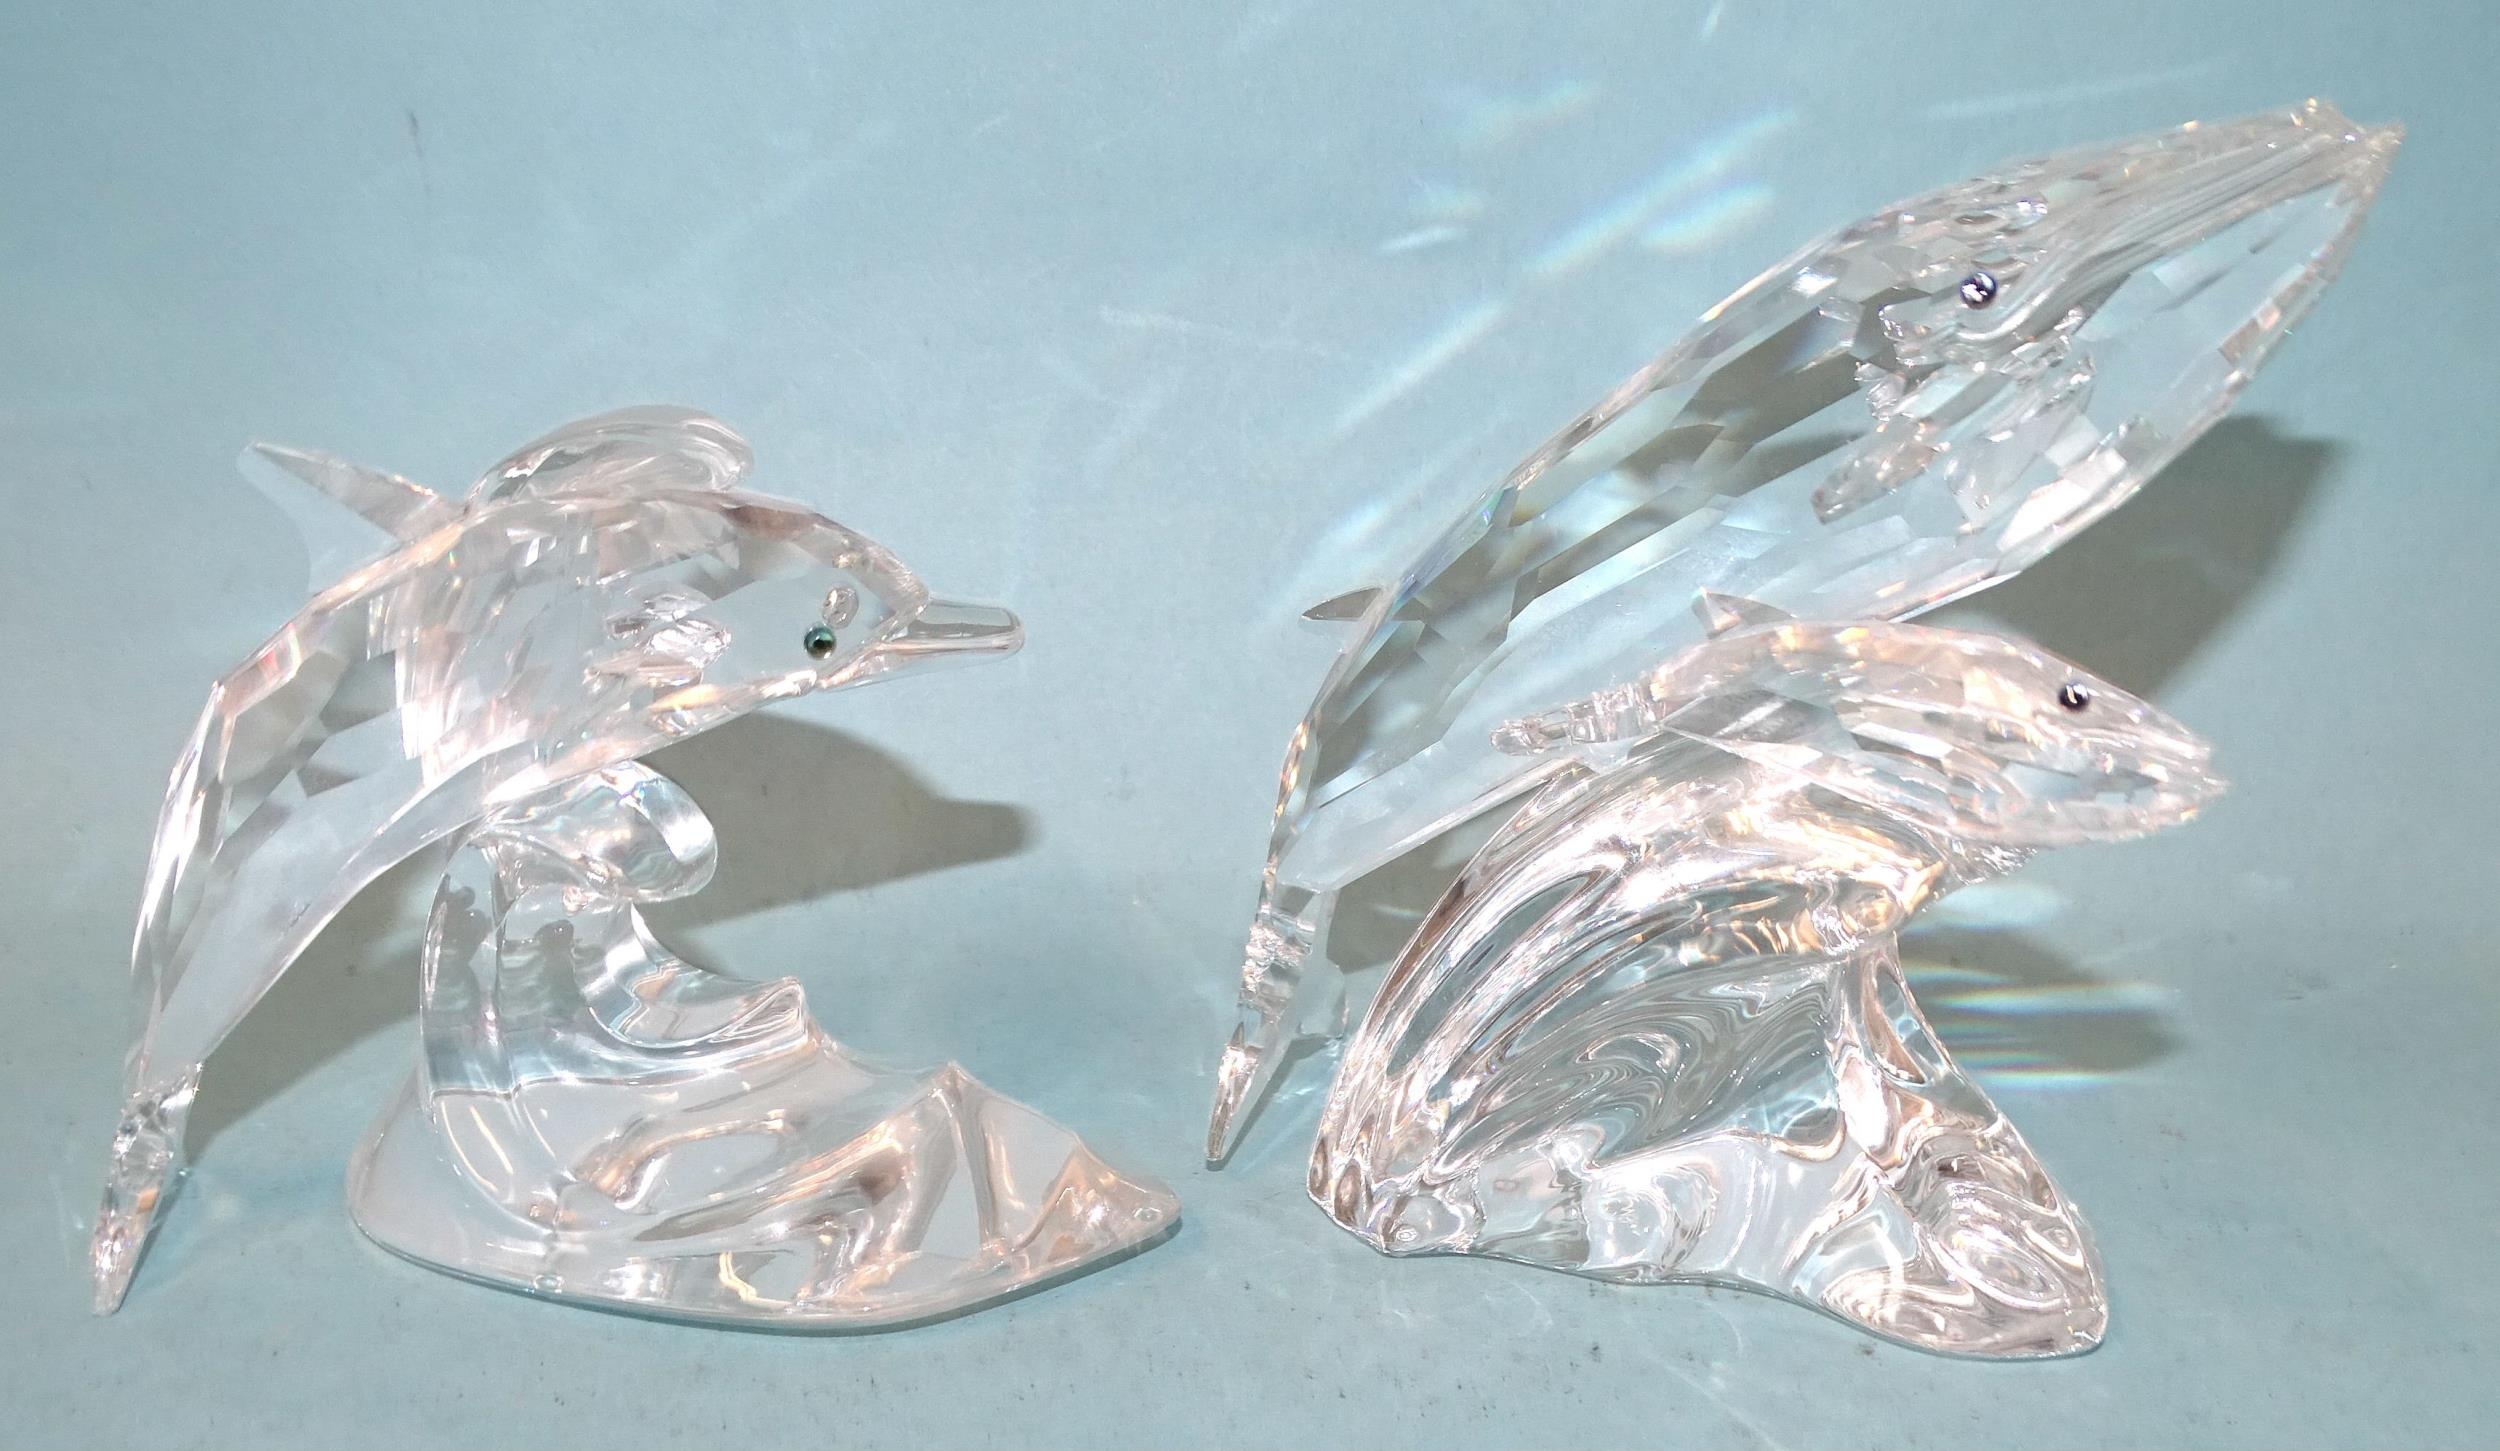 Swarovski, Annual Edition 1992 crystal sculptures: Care for Me -  The Whales and another of a